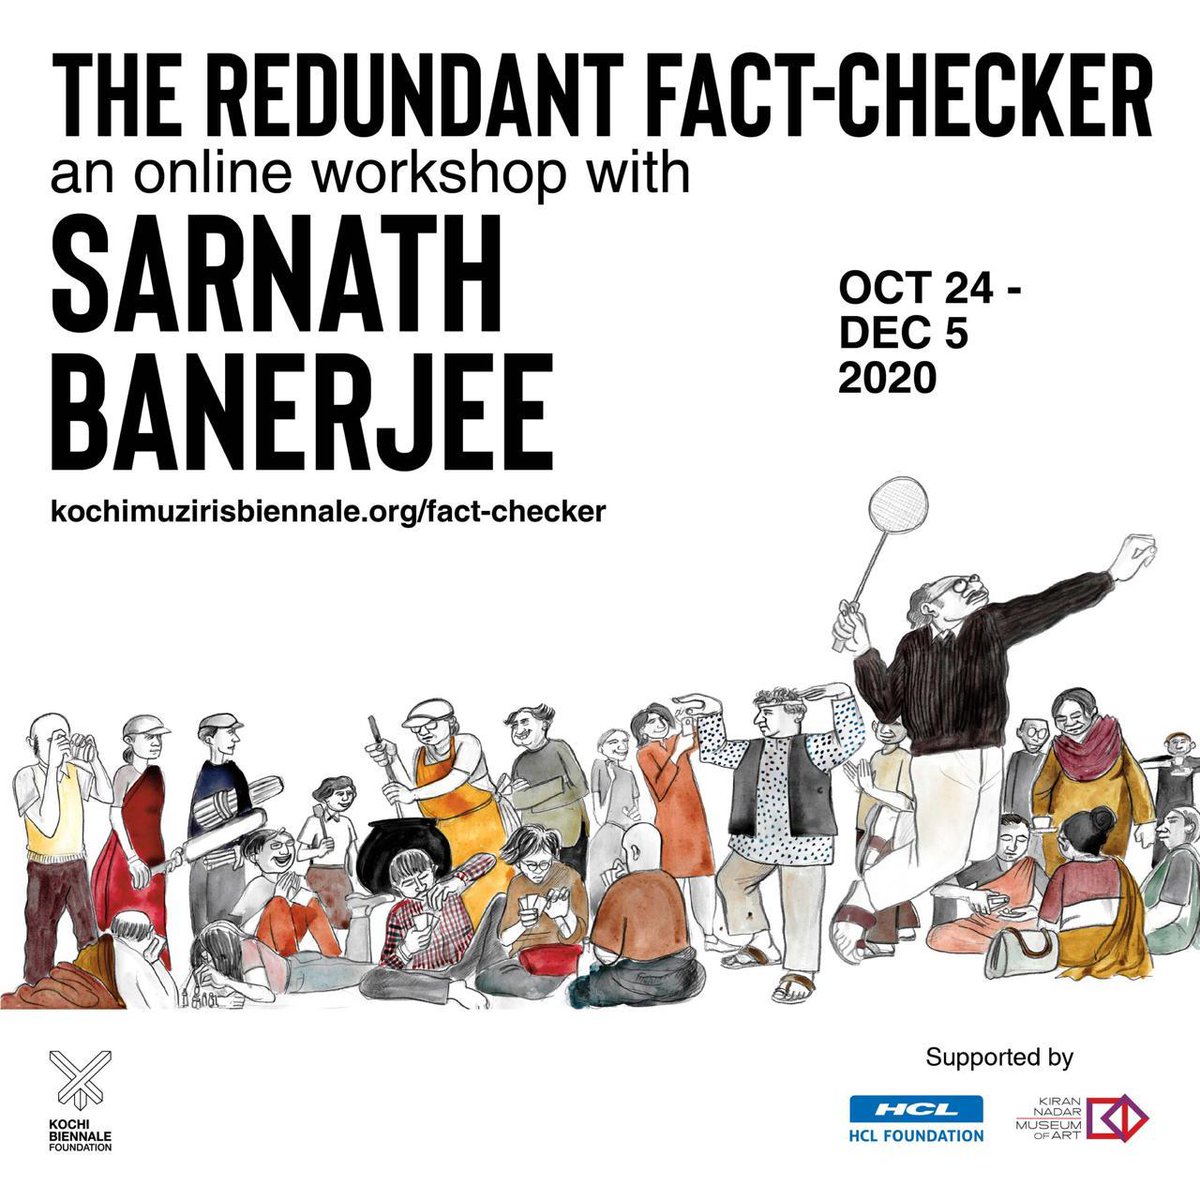 #Announcement : Kochi Biennale Foundation invites applications for 'The Redundant Fact-checker', an online workshop with Sarnath Banerjee. kochimuzirisbiennale.org/fact-checker/ Accepting applications till 12th October, at applications@kochimuzirisbiennale.org.